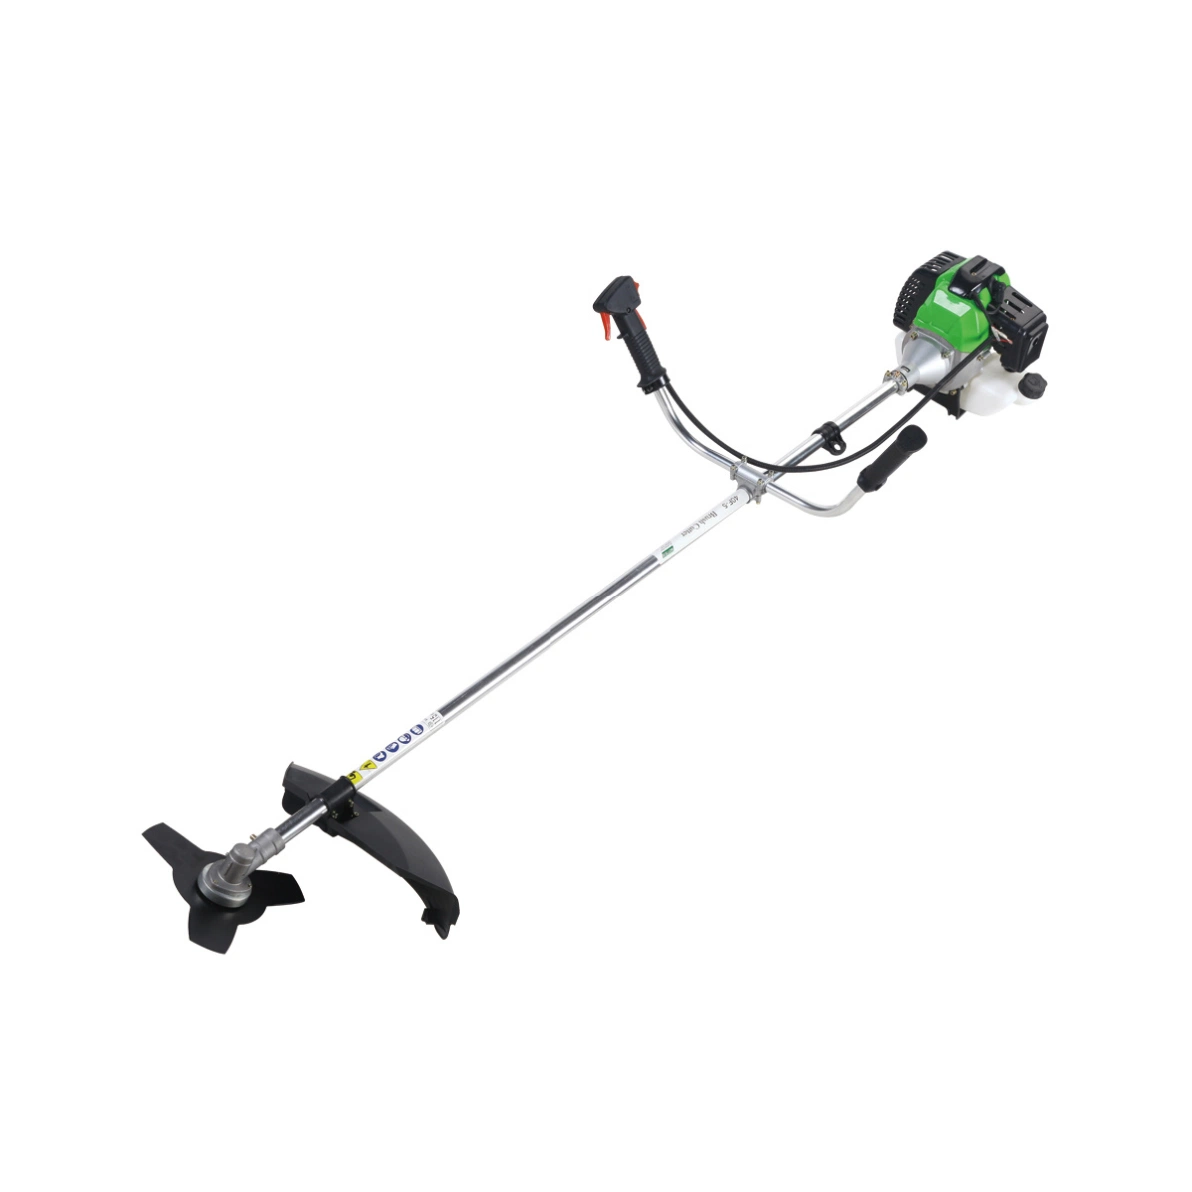 Gasoline Euro 5 Grass Trimmer Brush Cutter Bc520 with 2 Stroke Engine